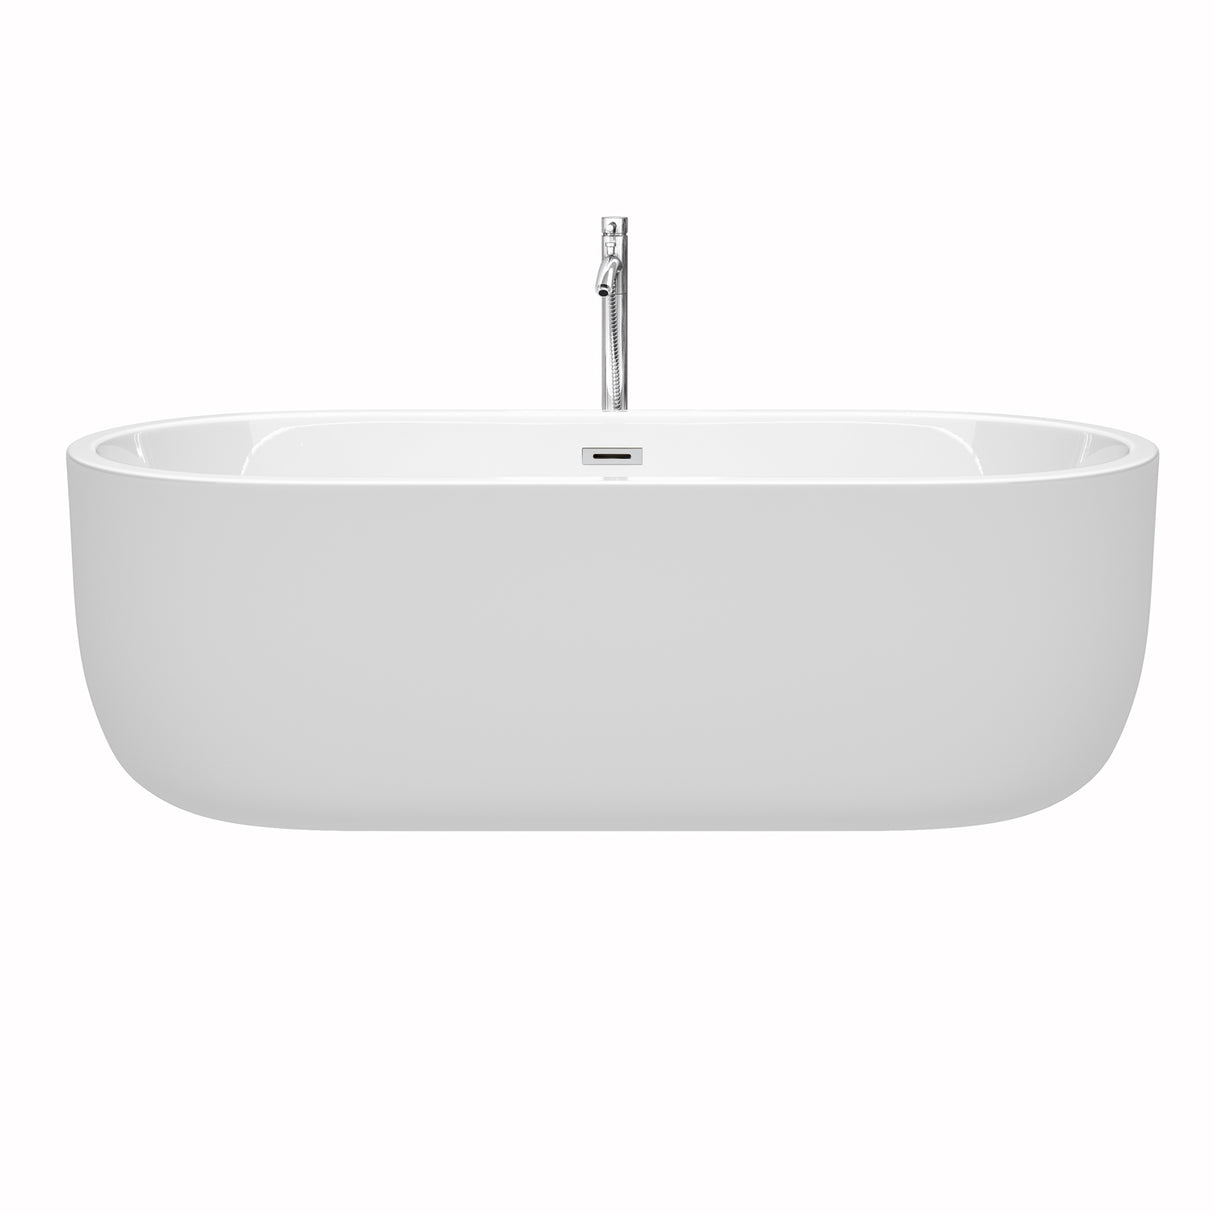 Juliette 71 Inch Freestanding Bathtub in White with Floor Mounted Faucet Drain and Overflow Trim in Polished Chrome